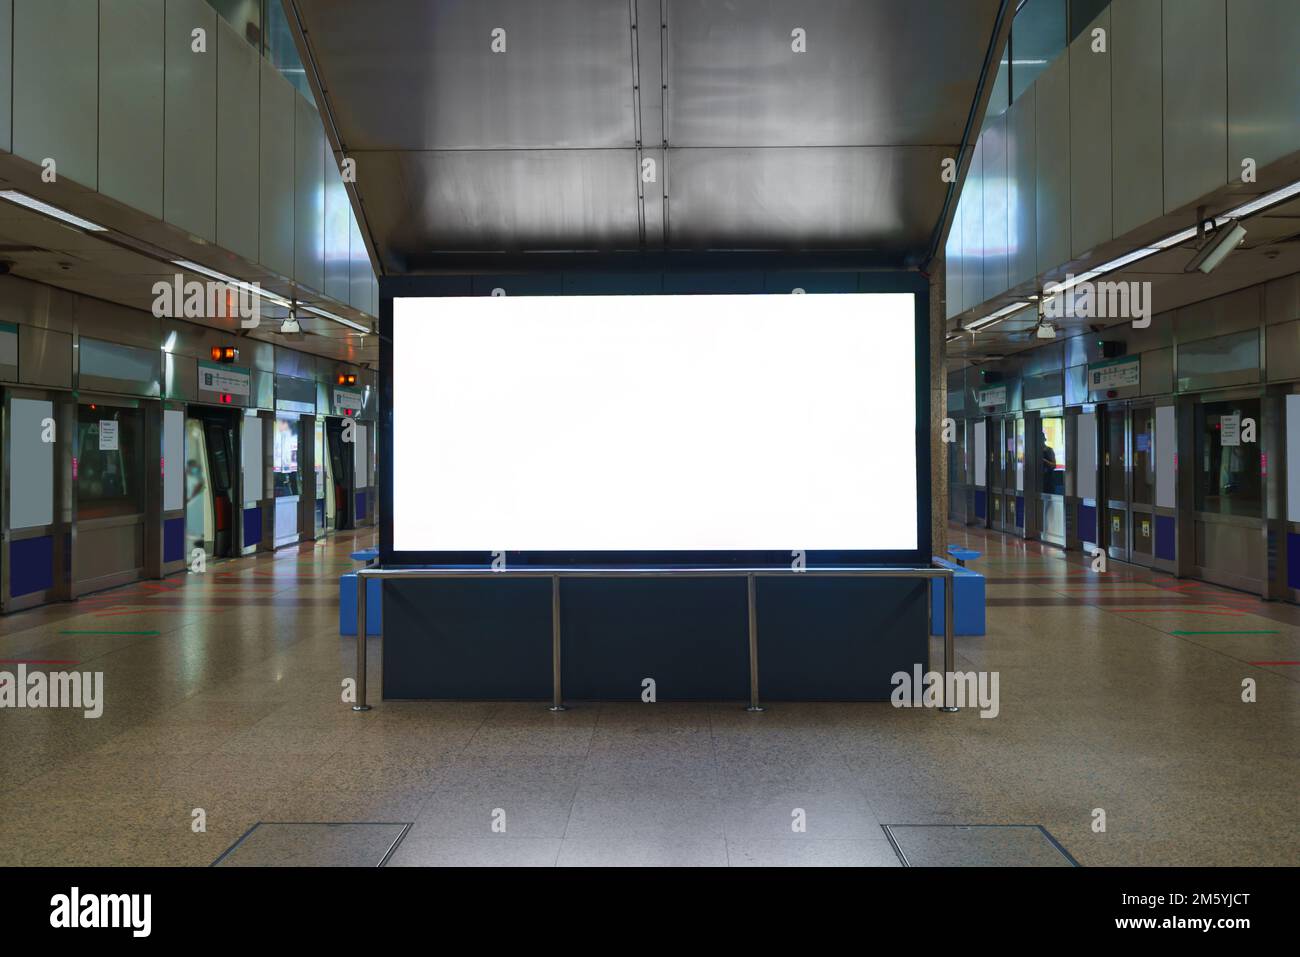 Blank billboard in subway or metro station, Useful for advertising. Stock Photo